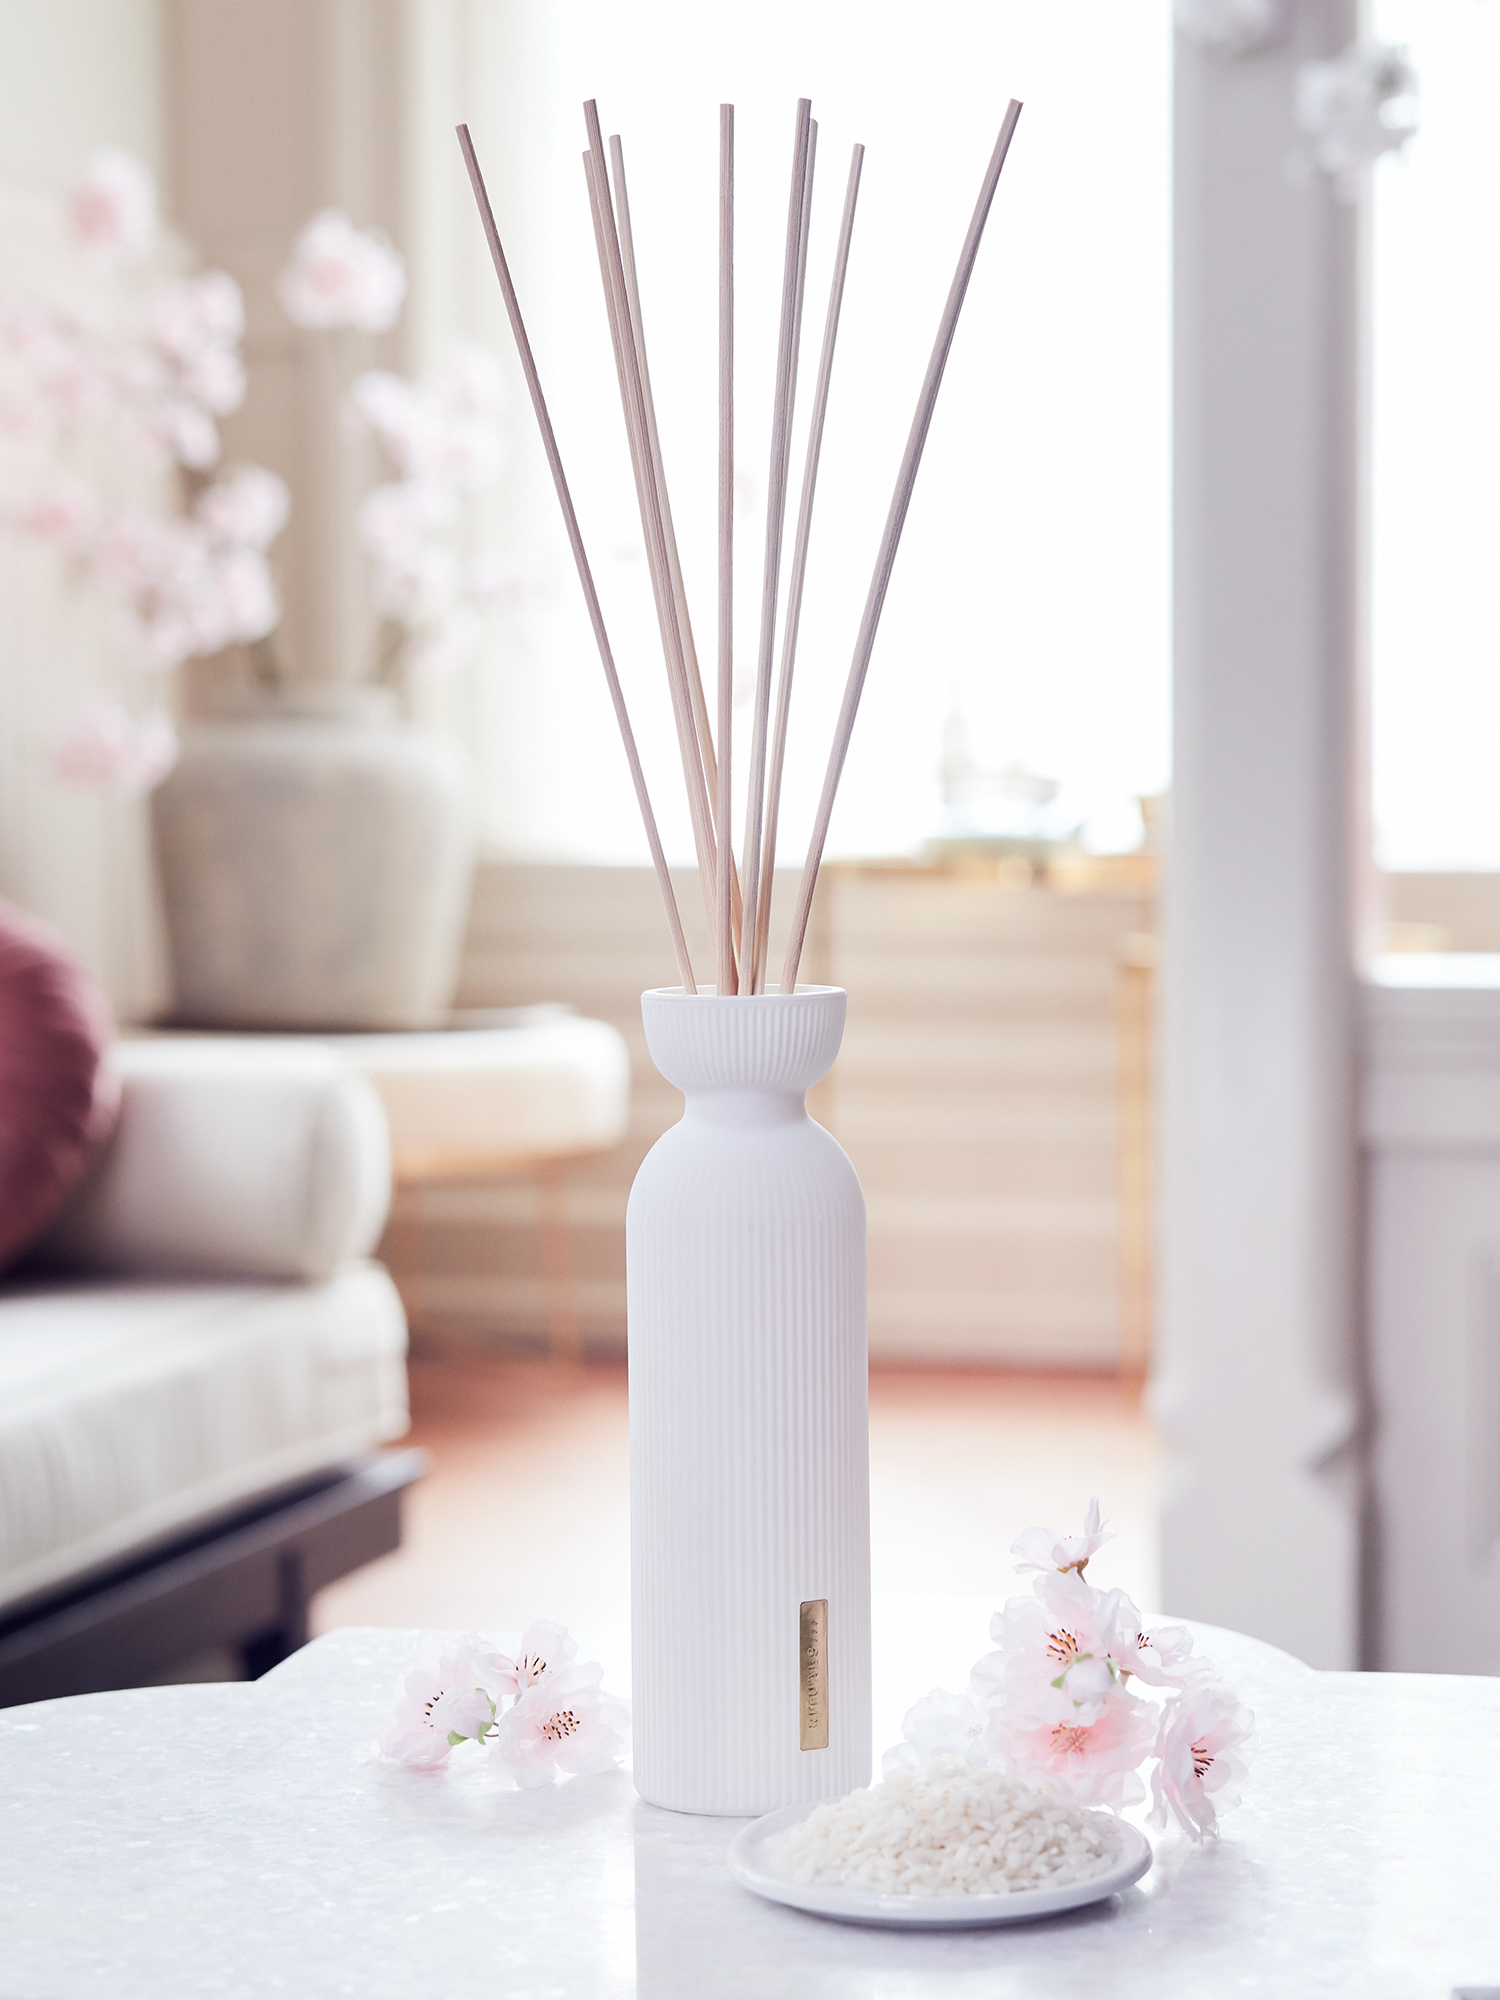 Pure Home Rituals Reed Diffuser No.372  Creed Aventus For Her – Allestree  Aesthetics Medical